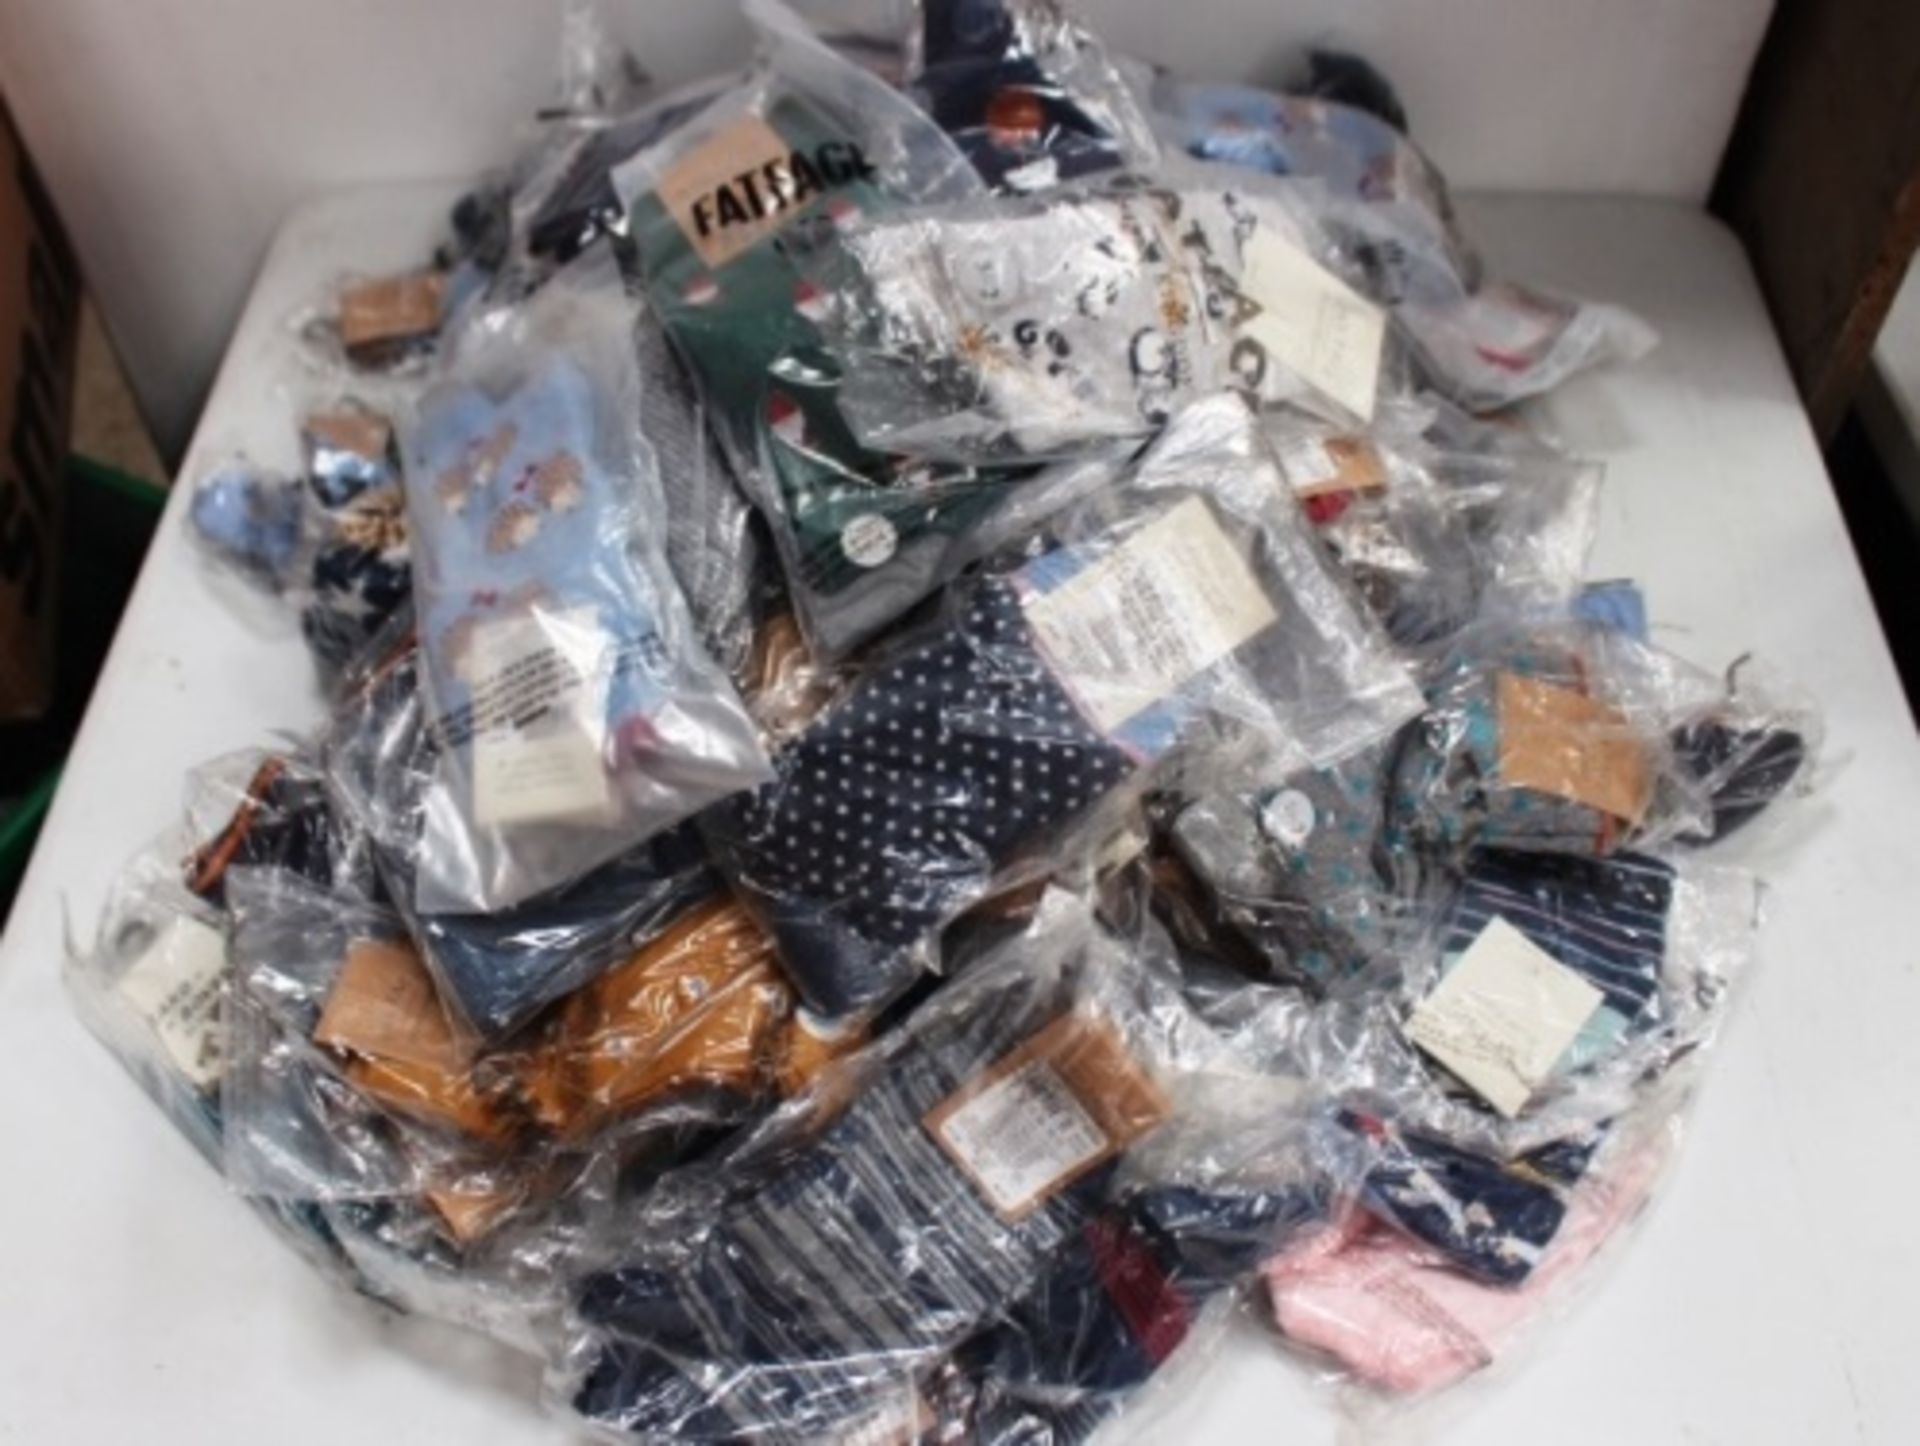 100 x pairs of Fat Face adult socks in various styles and sizes - New with tags (EB4)